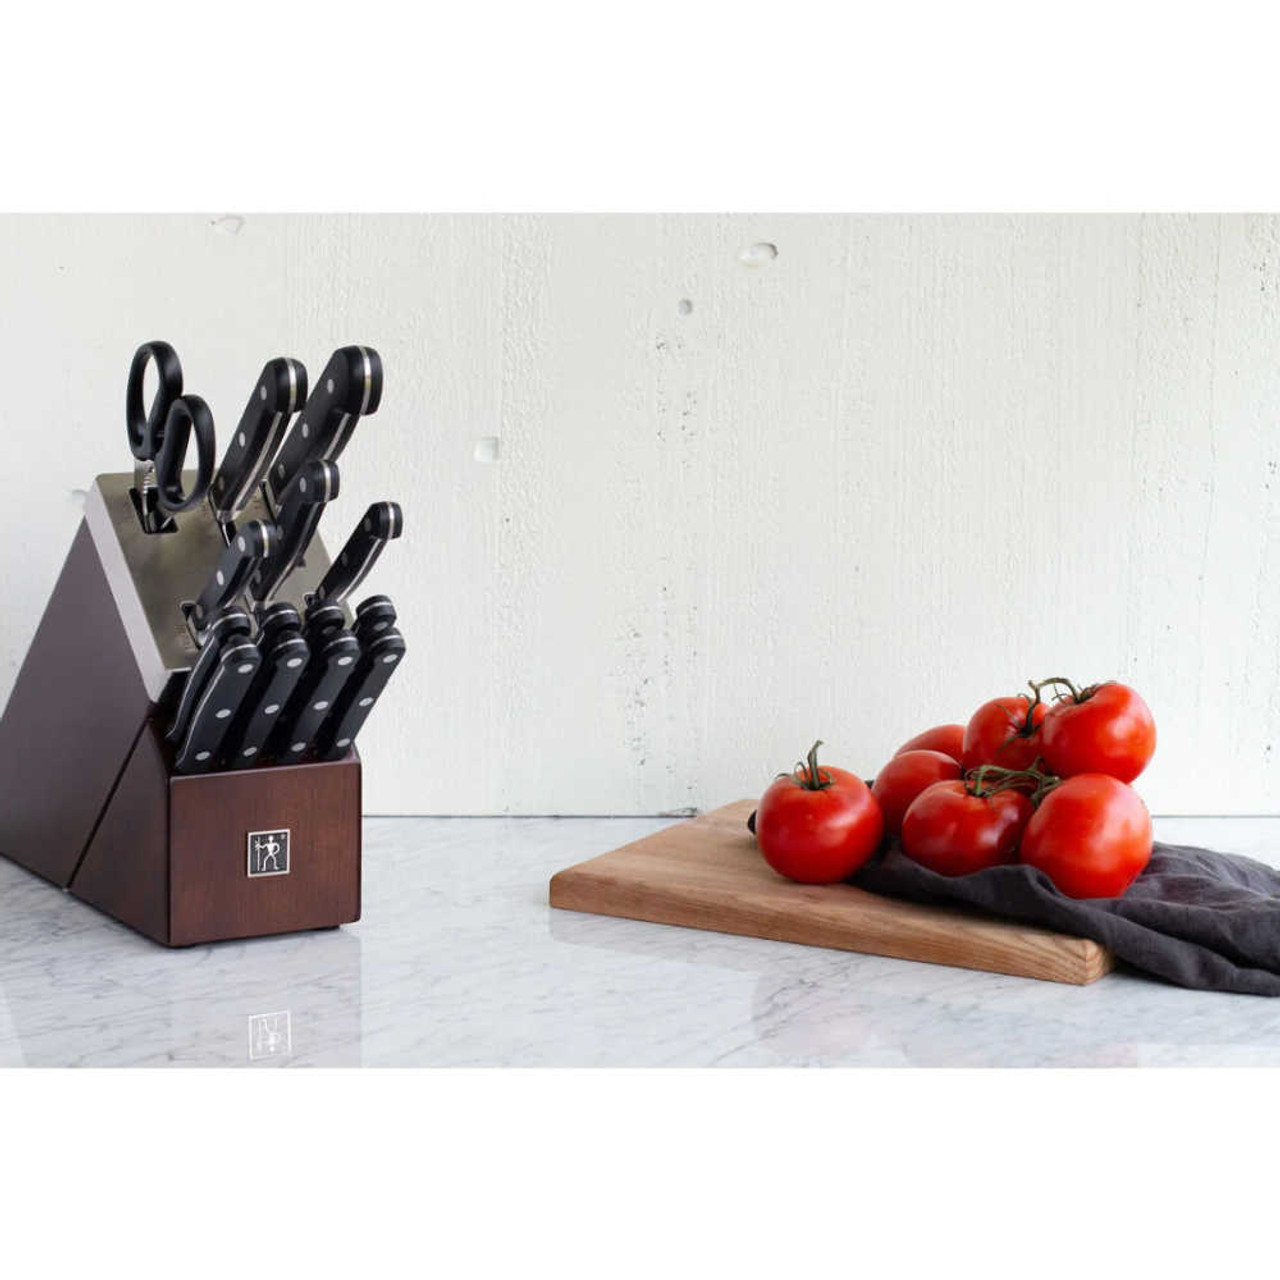 https://cdn11.bigcommerce.com/s-hccytny0od/images/stencil/1280x1280/products/5172/22354/Henckels_Classic_15-Piece_Self-Sharpening_Knife_Block_Set_2__83903.1668889583.jpg?c=2?imbypass=on